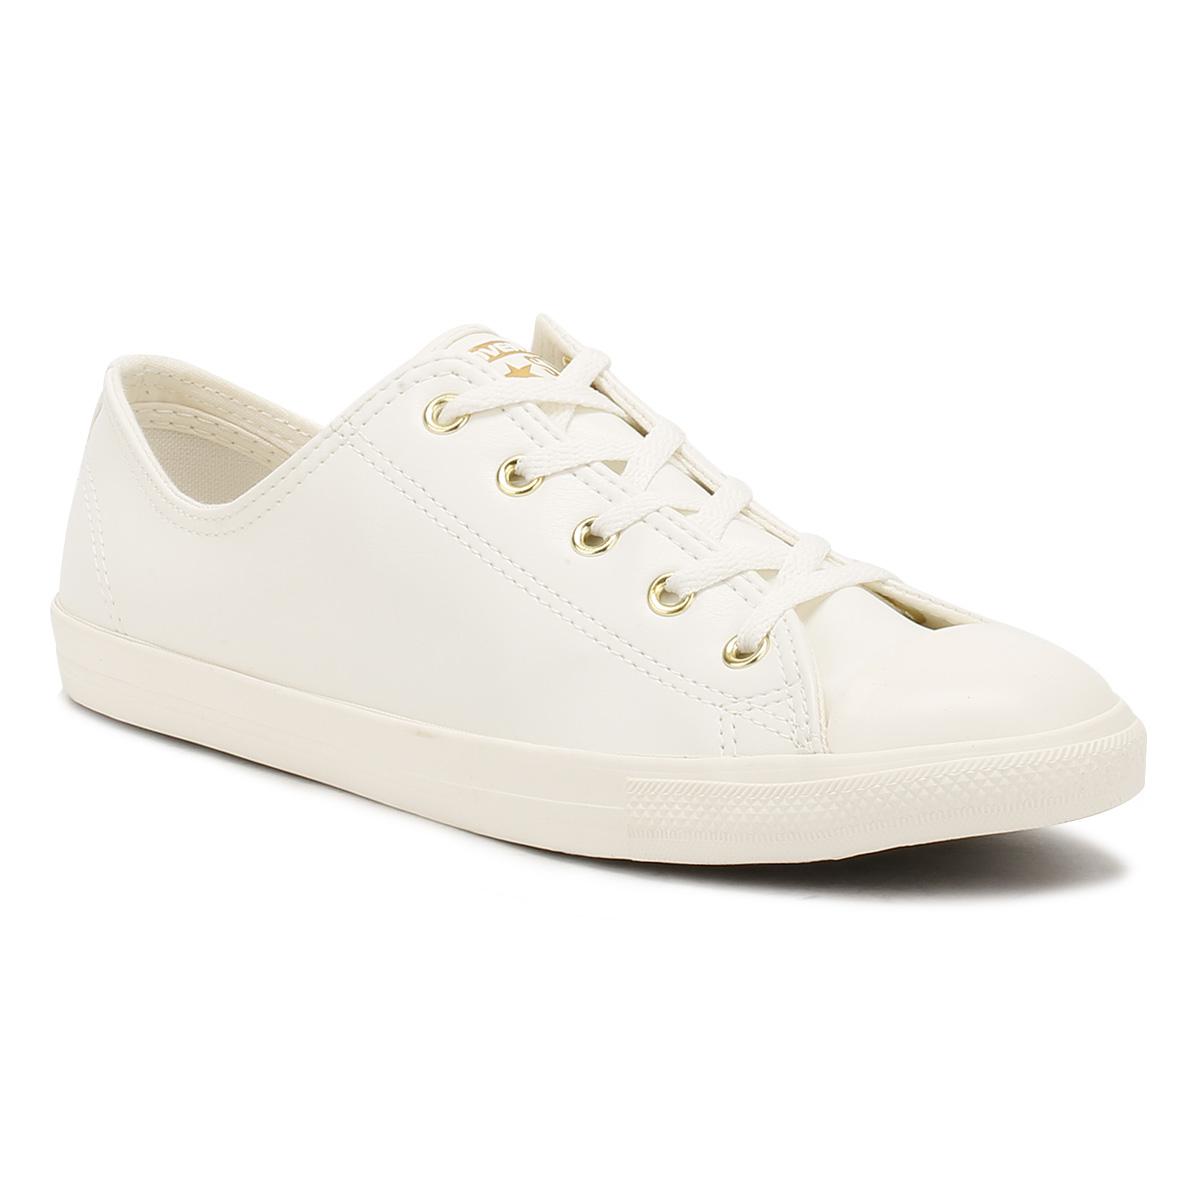 Converse Chuck Taylor All Star Dainty Ox Trainers Shop, 53% OFF |  www.chine-magazine.com